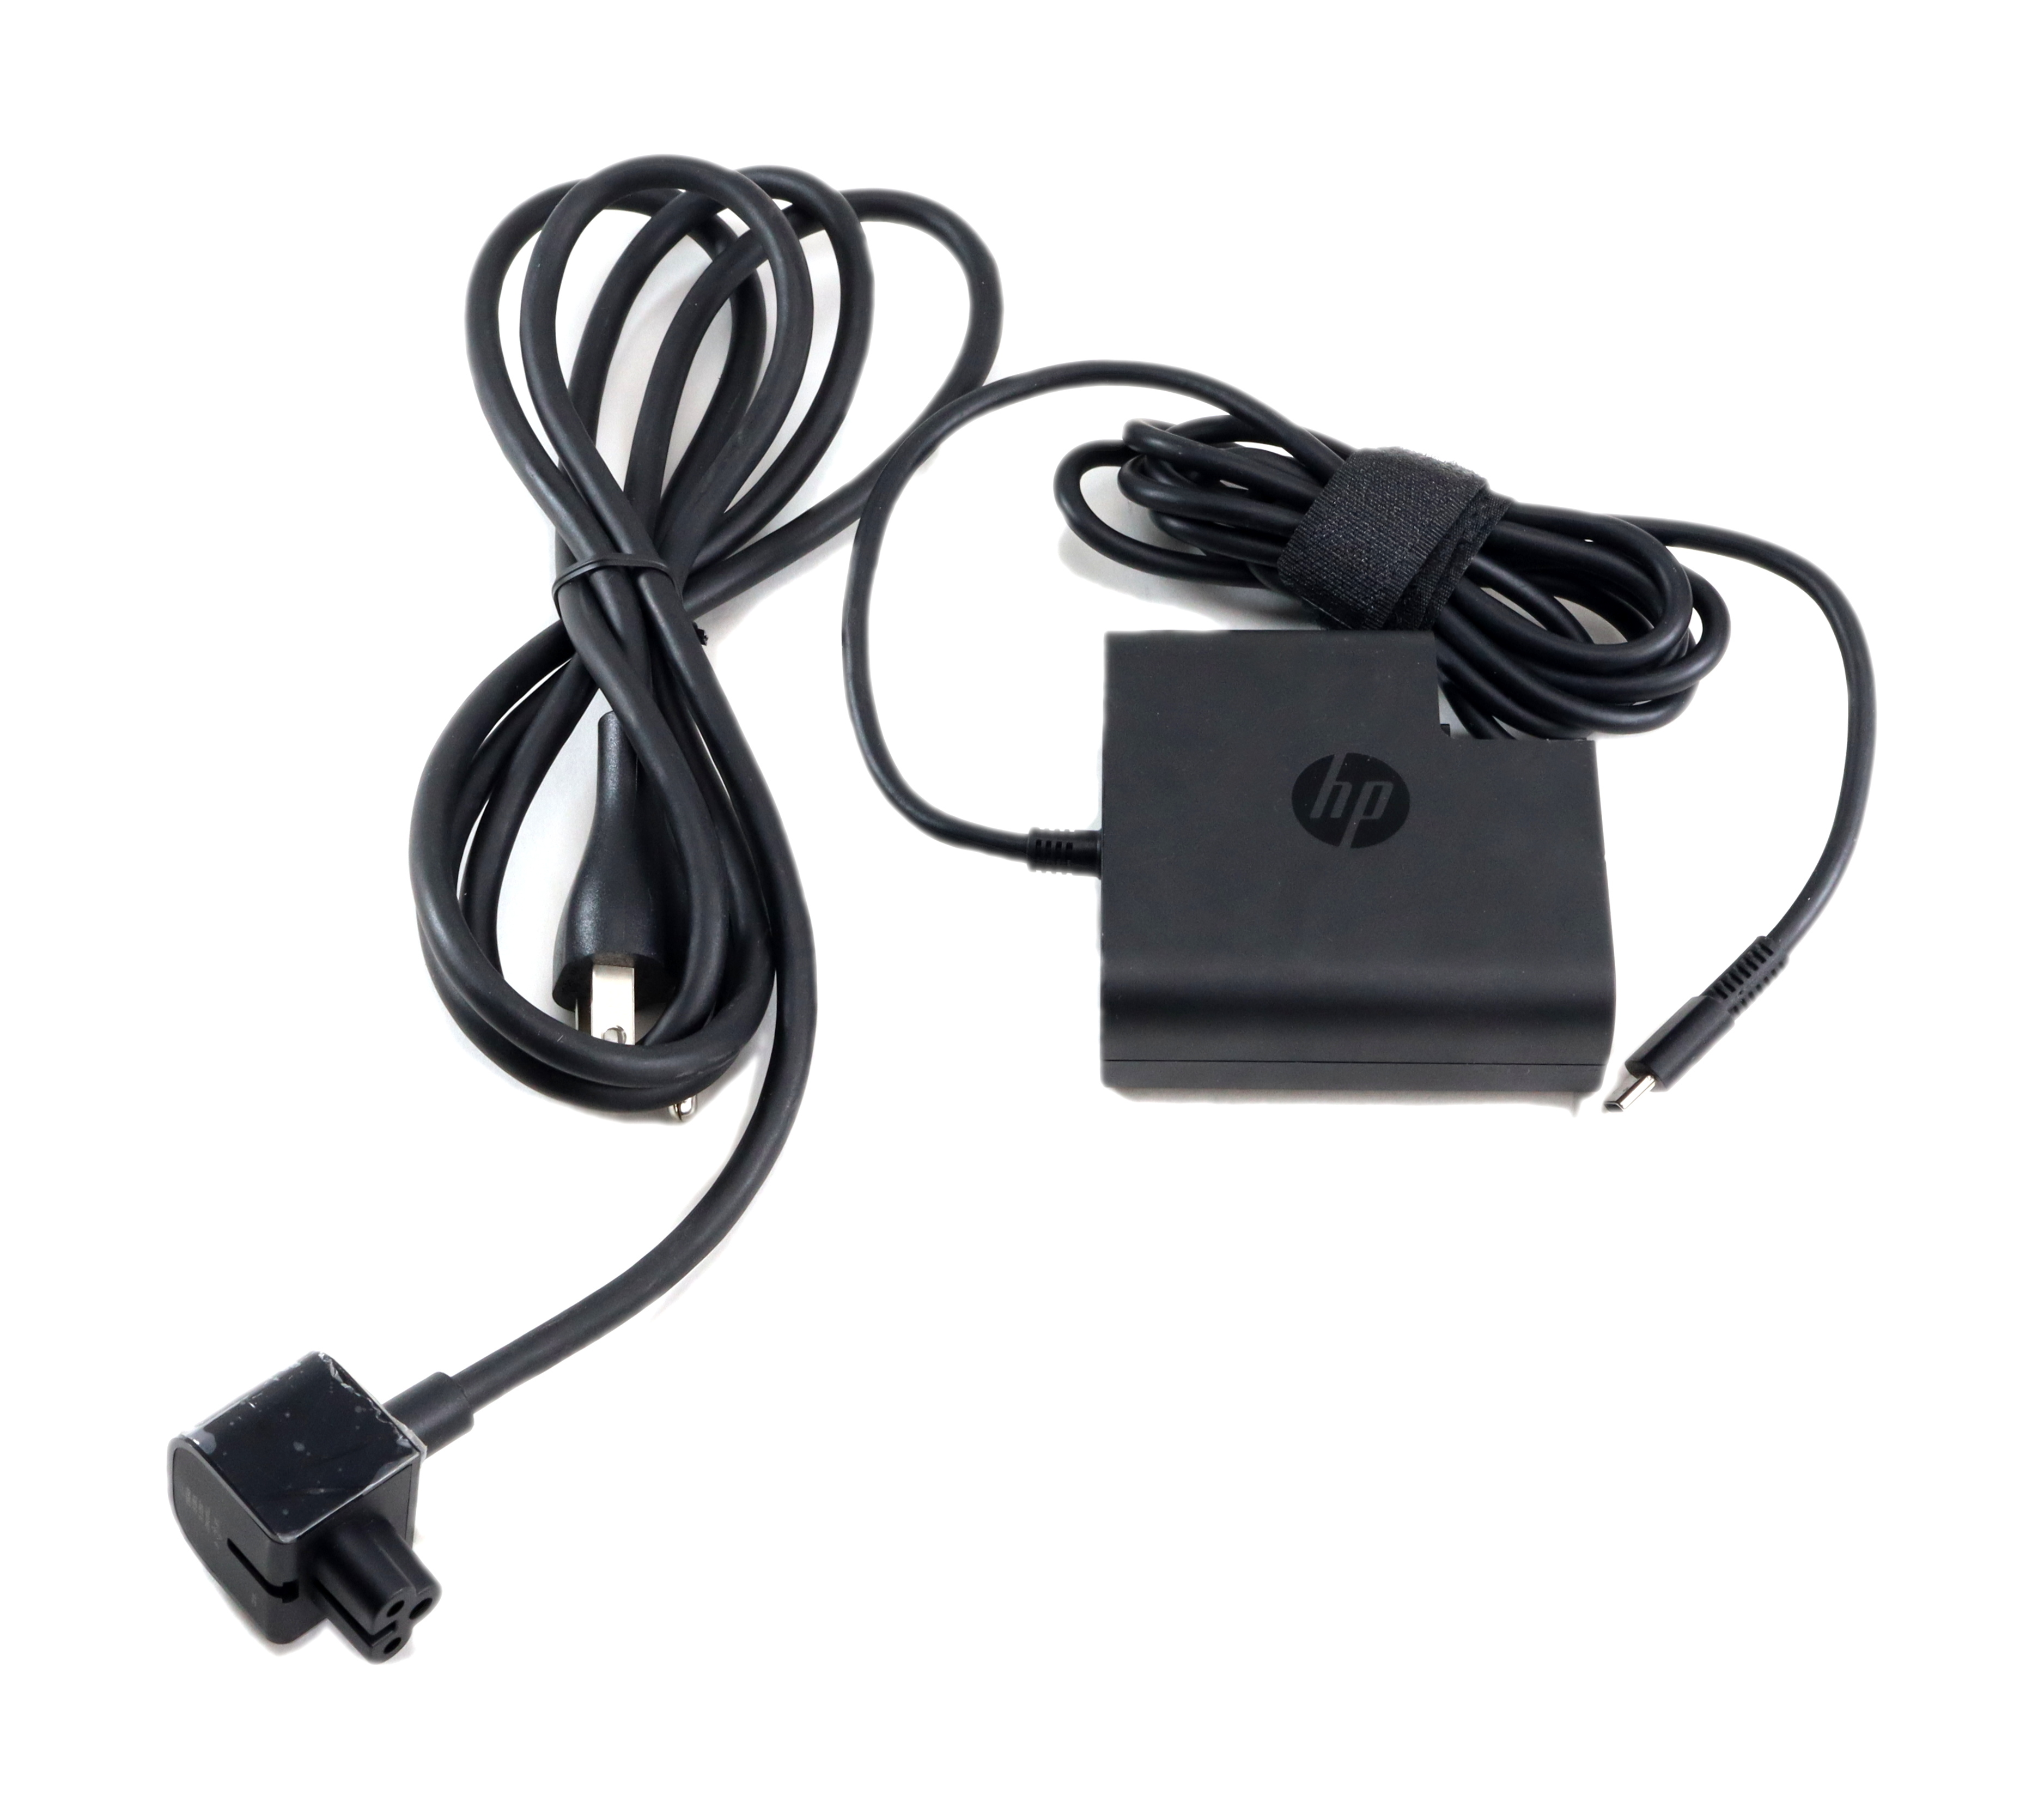 Uheldig Udløbet Lao HP AC Adapter 65W USB-C for HP Pro Elite Spectre Series X2 G2 TPN-AA03  925740-004 860209-850 [925740-004] - $34.98 : Professional Multi Monitor  Workstations, Graphics Card Experts